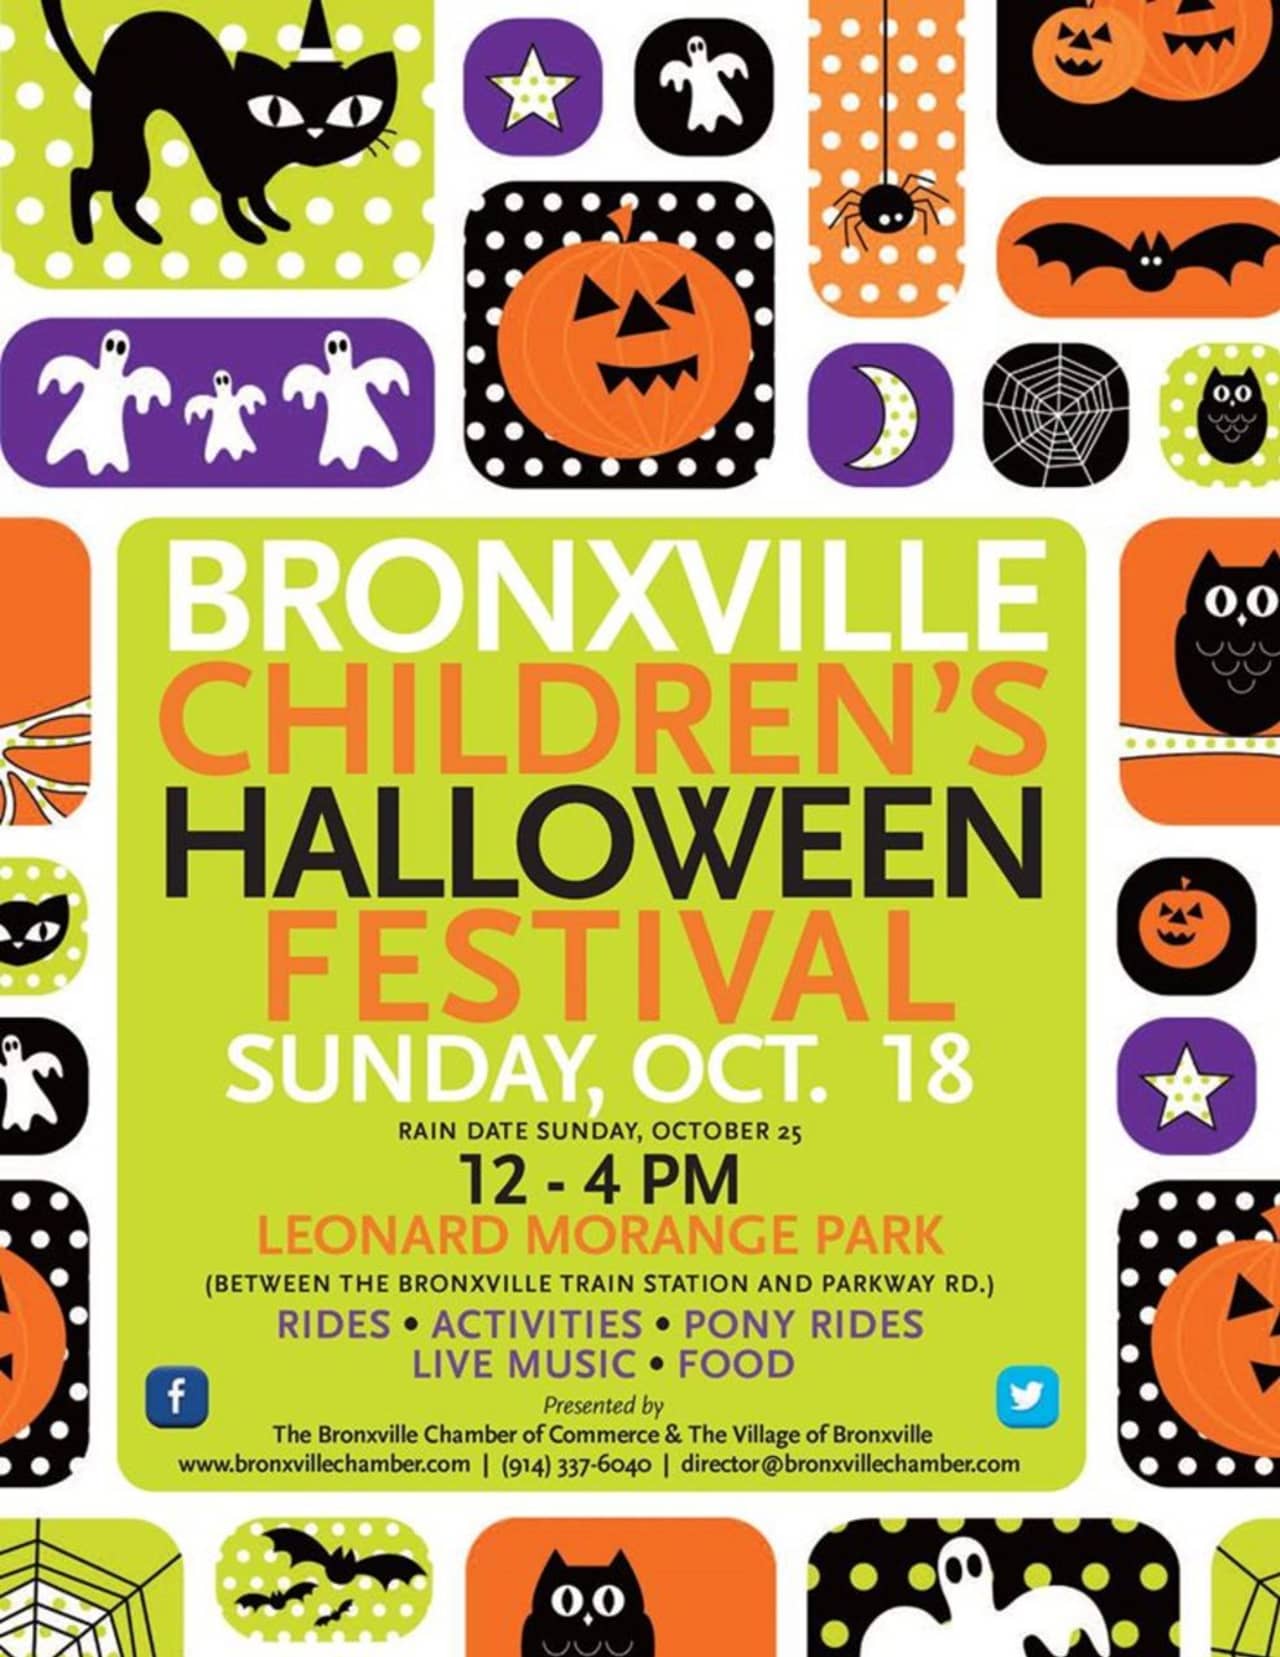 The 2015 Bronxville Children's Halloween Festival takes place Oct. 18. 